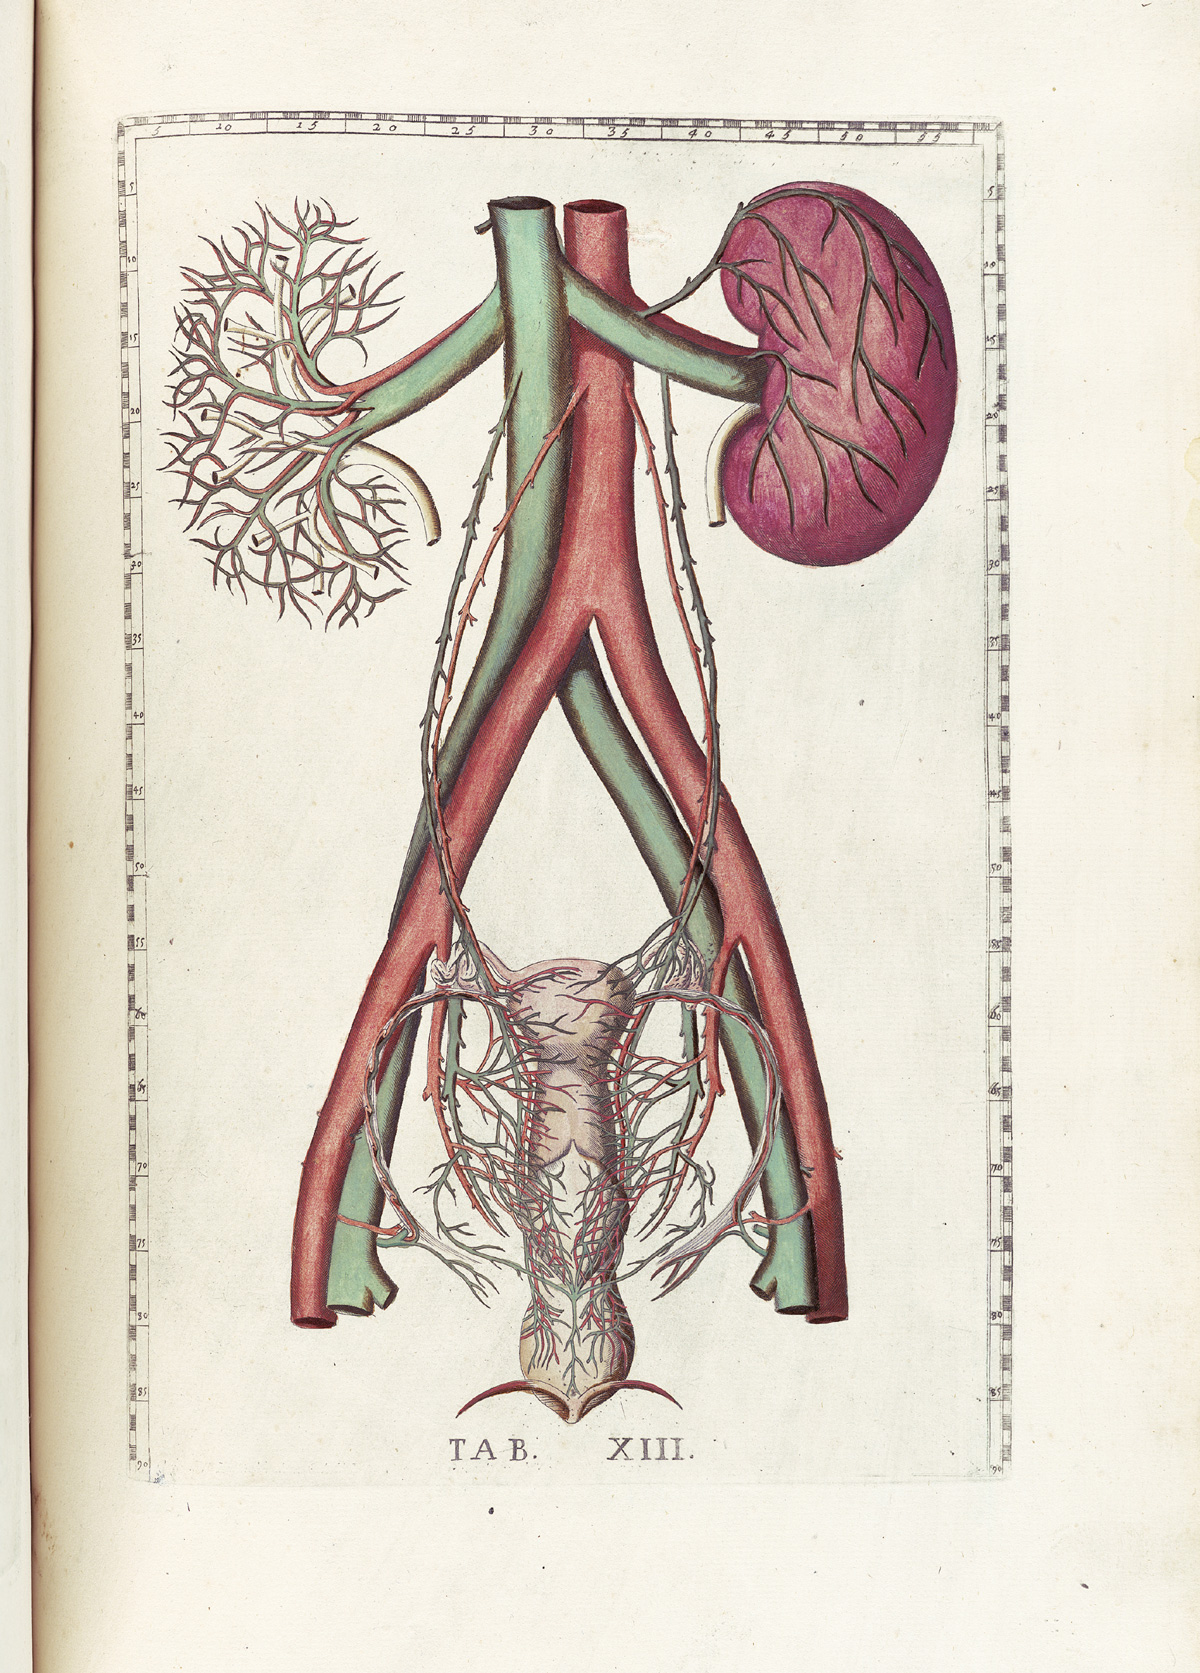 Hand-colored etching of the renal and female reproductive systems with emphasis on the veins and arteries attending them; on the upper right is a kidney, while on the left is only the vascular system of the kidney with the other tissue gone; smaller veins and arteries feed the uterus, and vagina at the lower end of the page; from Bartholomeo Eustachi’s Tabulae anatomicae, NLM Call no.: WZ 260 E87t 1783.